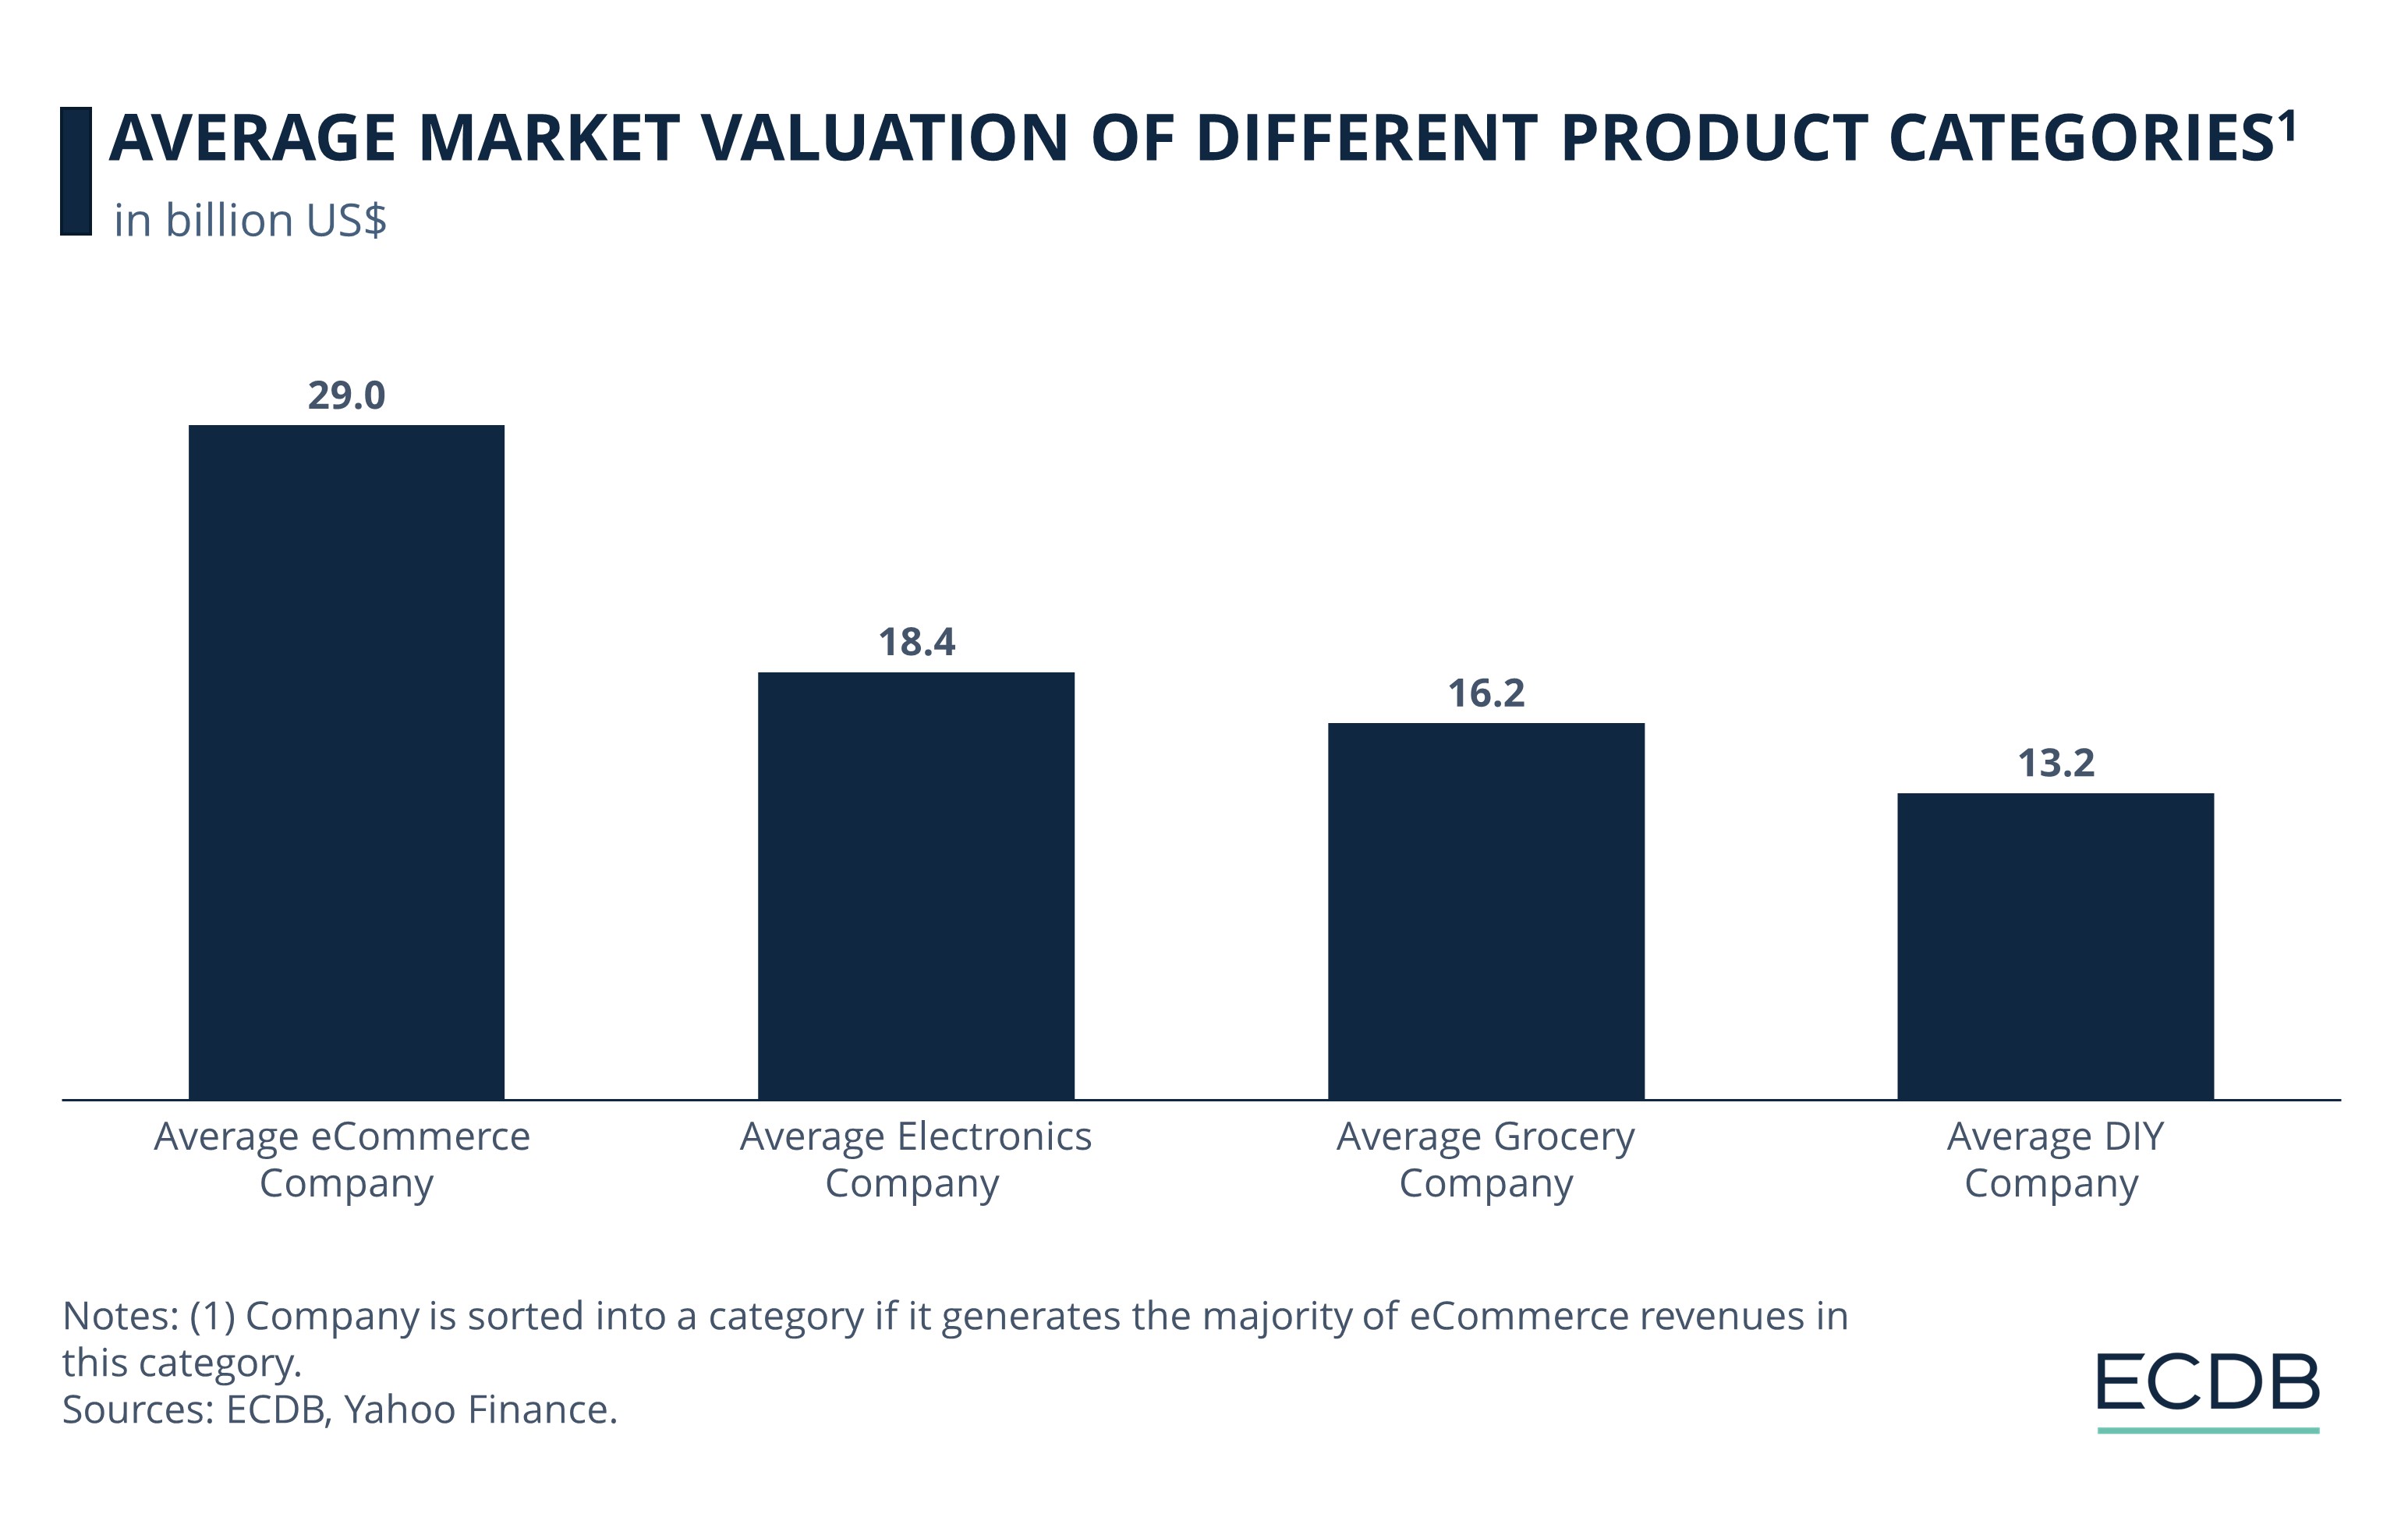 Company Valuation of Different Product Categories